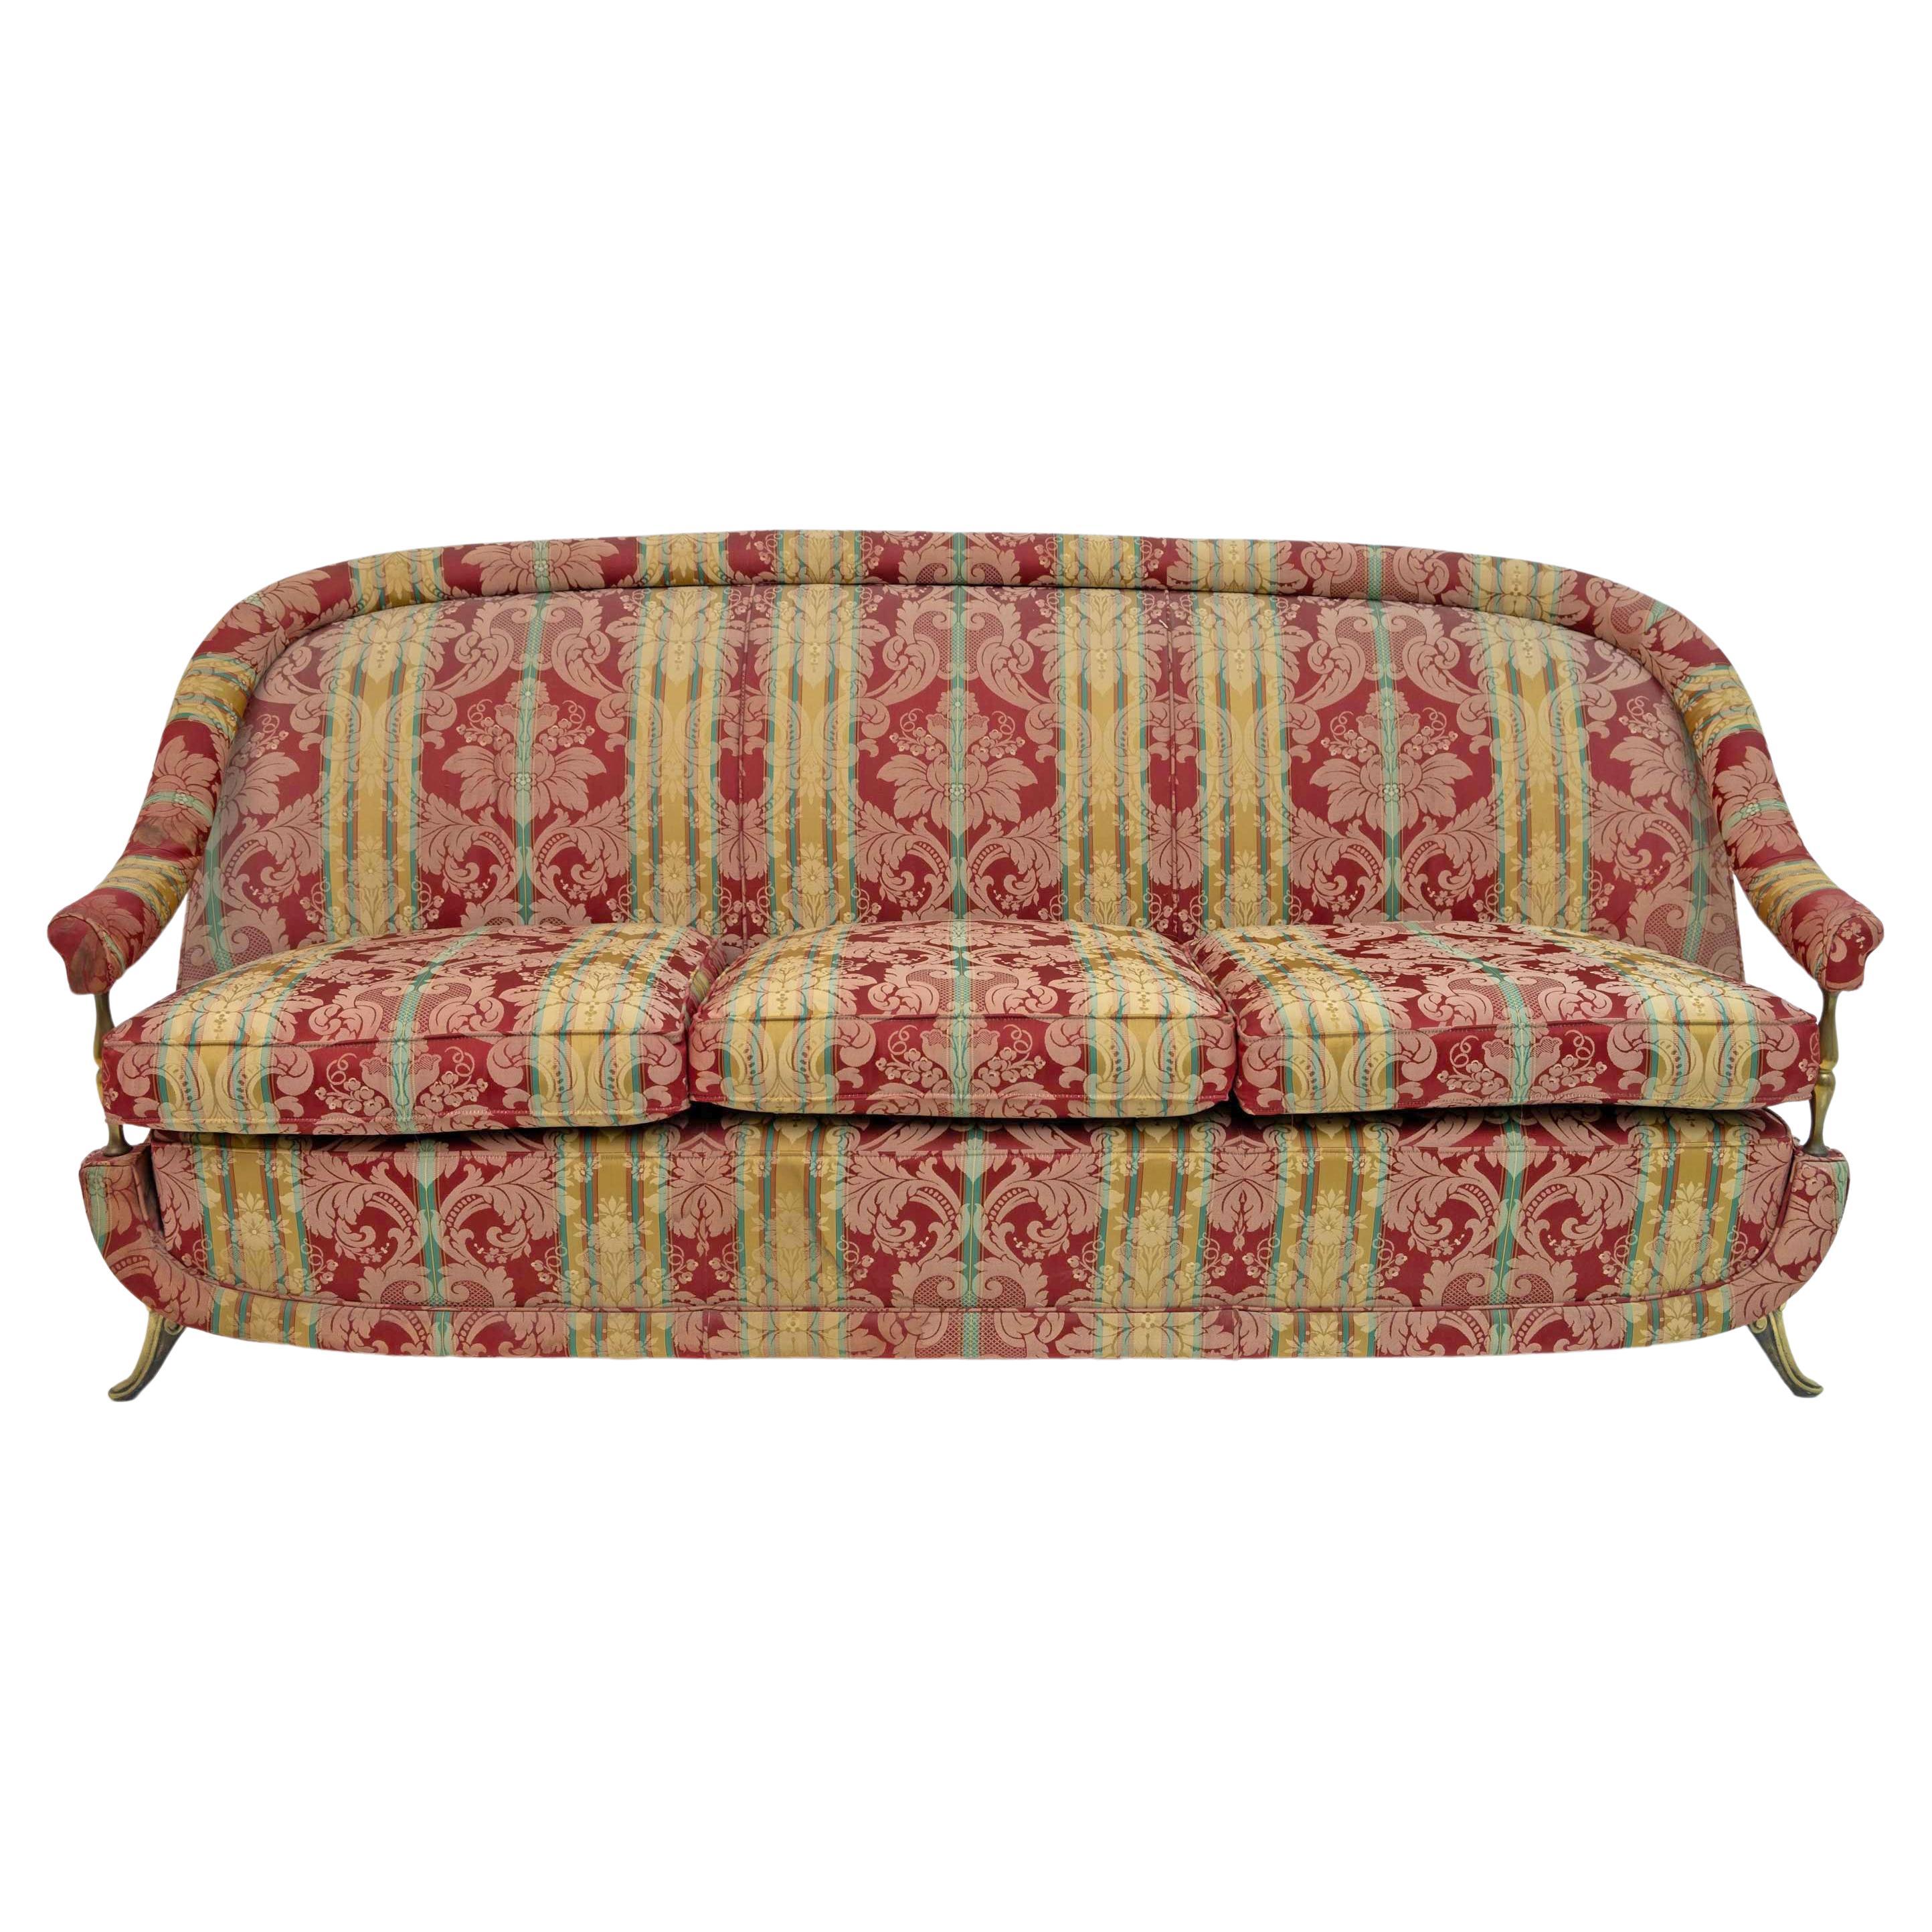 Art Dèco Style French Brass And Fabric Sofa, 1950s